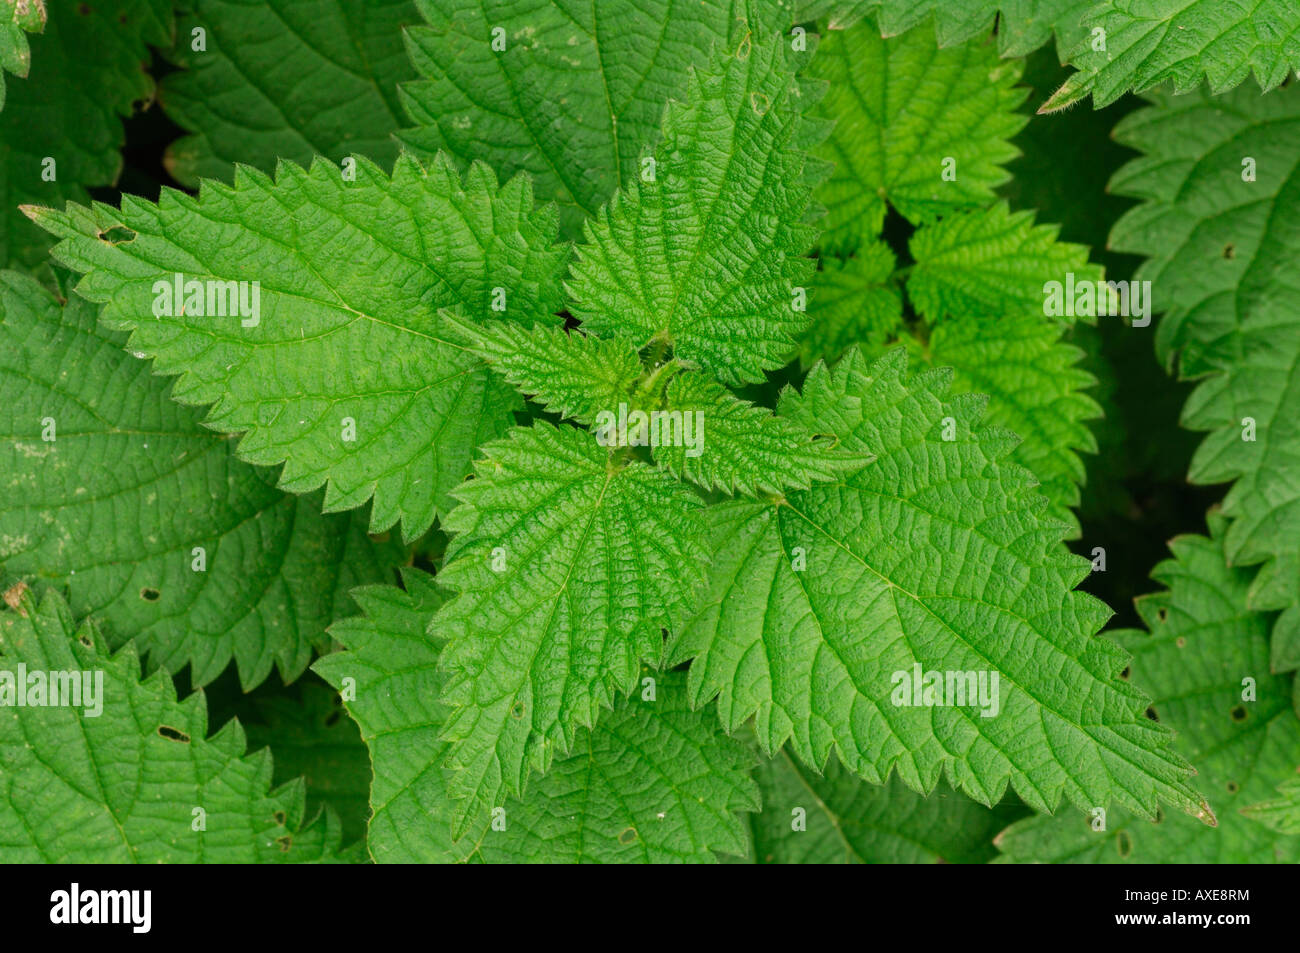 Stinging Nettle Urtica dioica close up showing pattern formation of leaves Devon October 2007 Stock Photo